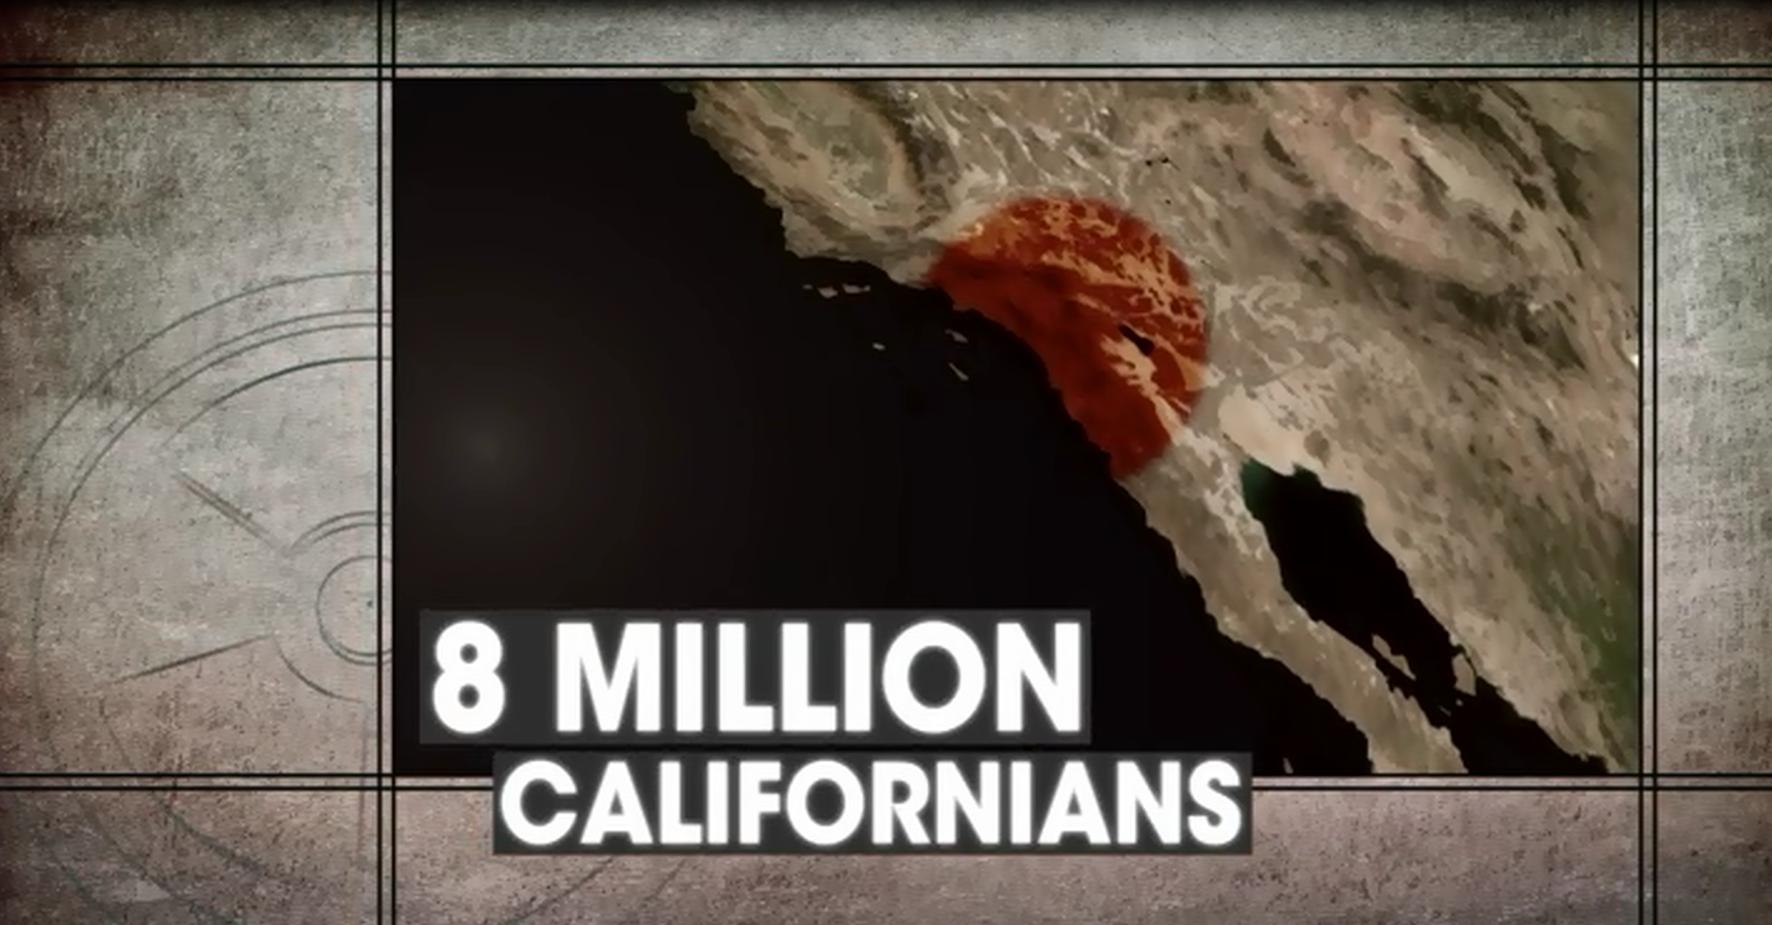 New television ad highlights San Onofre reactor problems